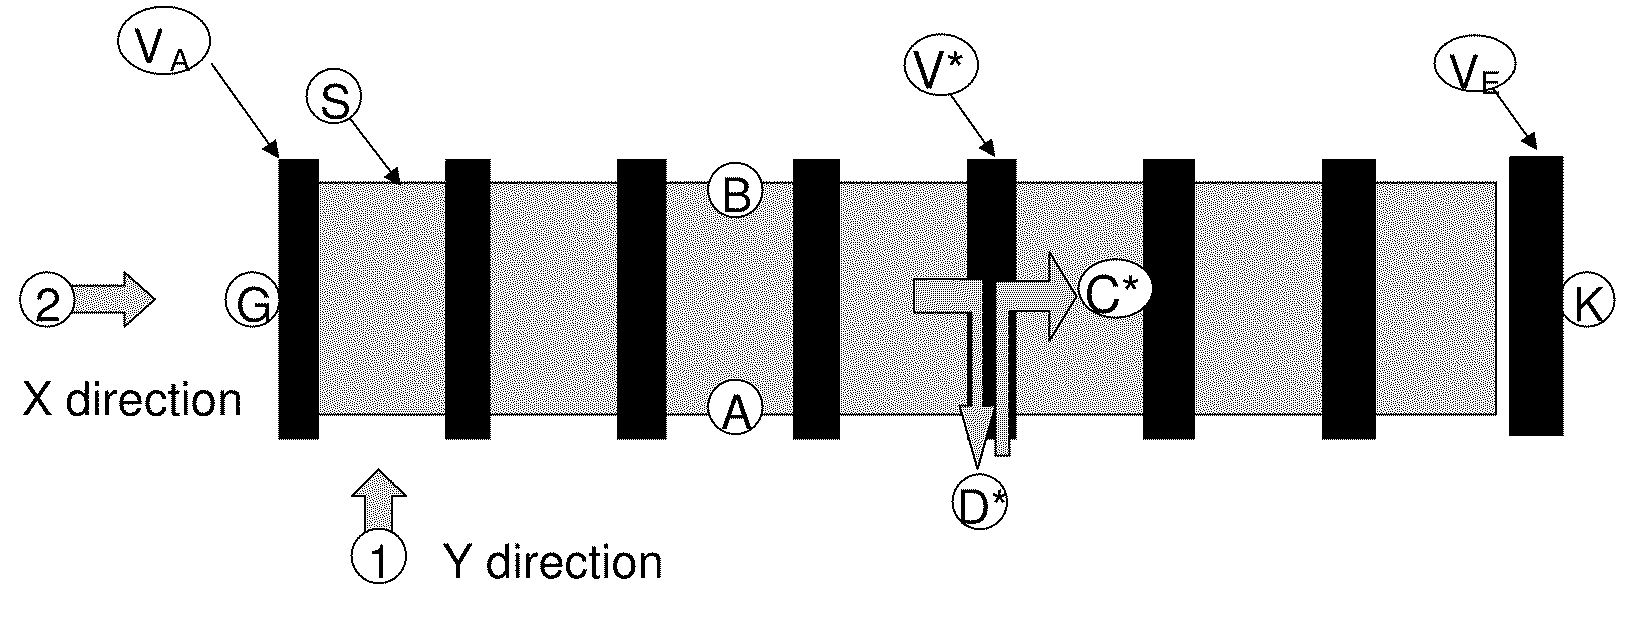 Apparatus for the semi-continuous chromatographic separation of binary and multi-component mixtures